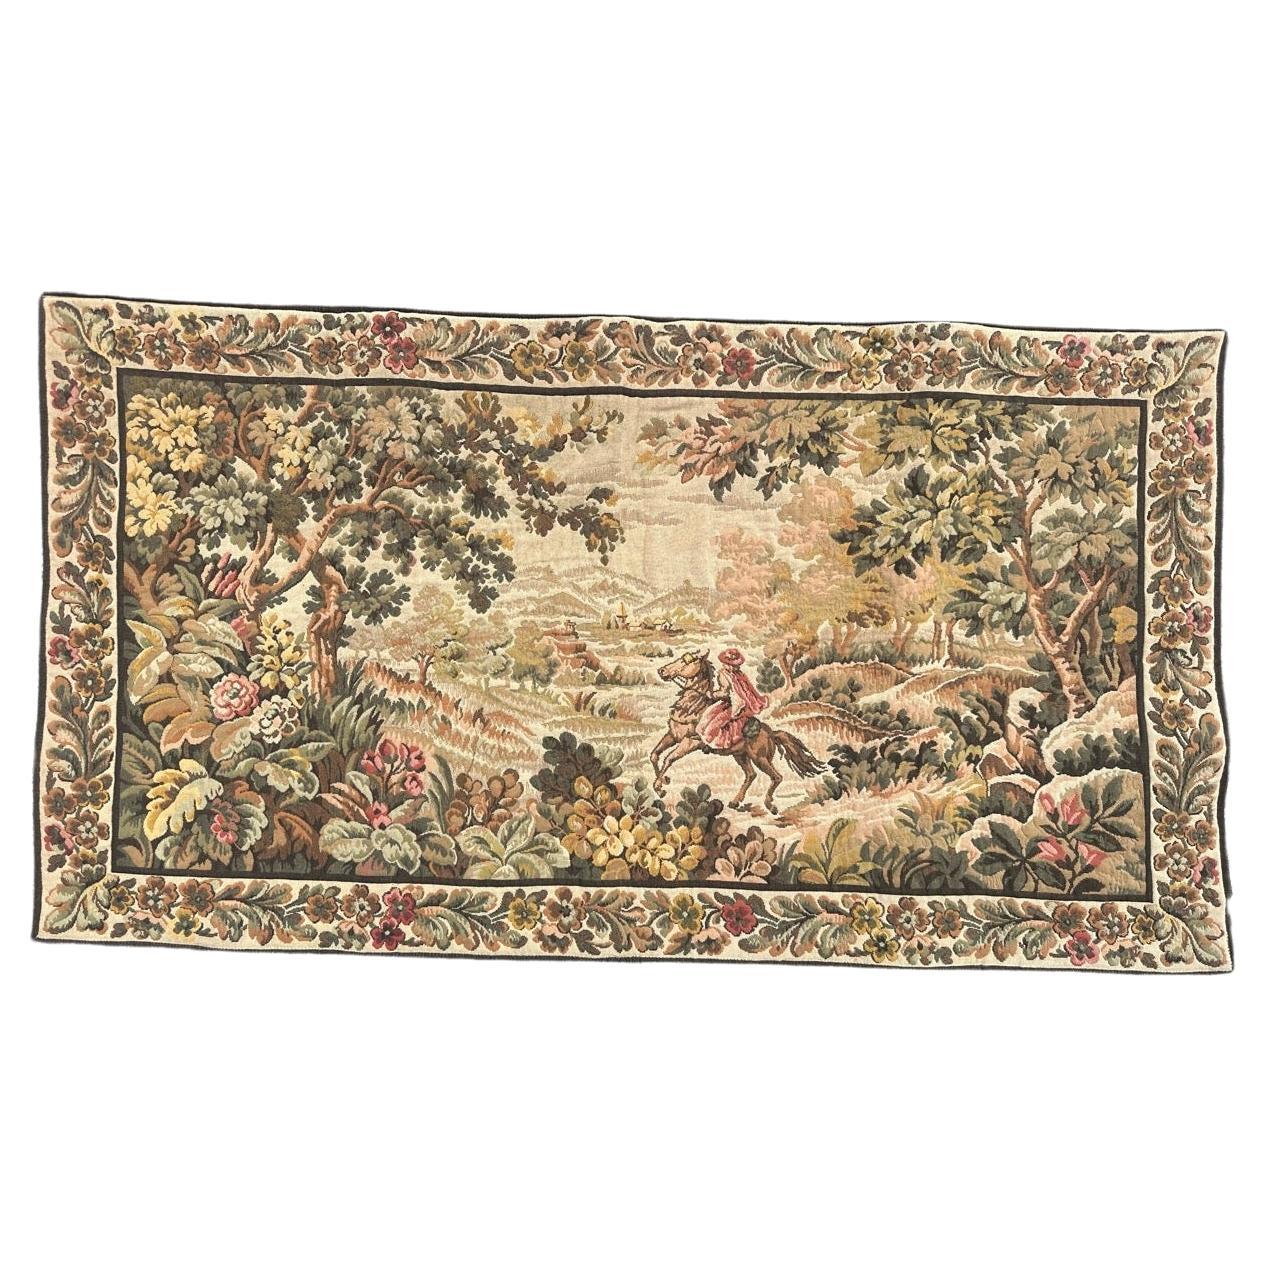 Bobyrug's Nice French Aubusson Style Jacquard Wandteppich 